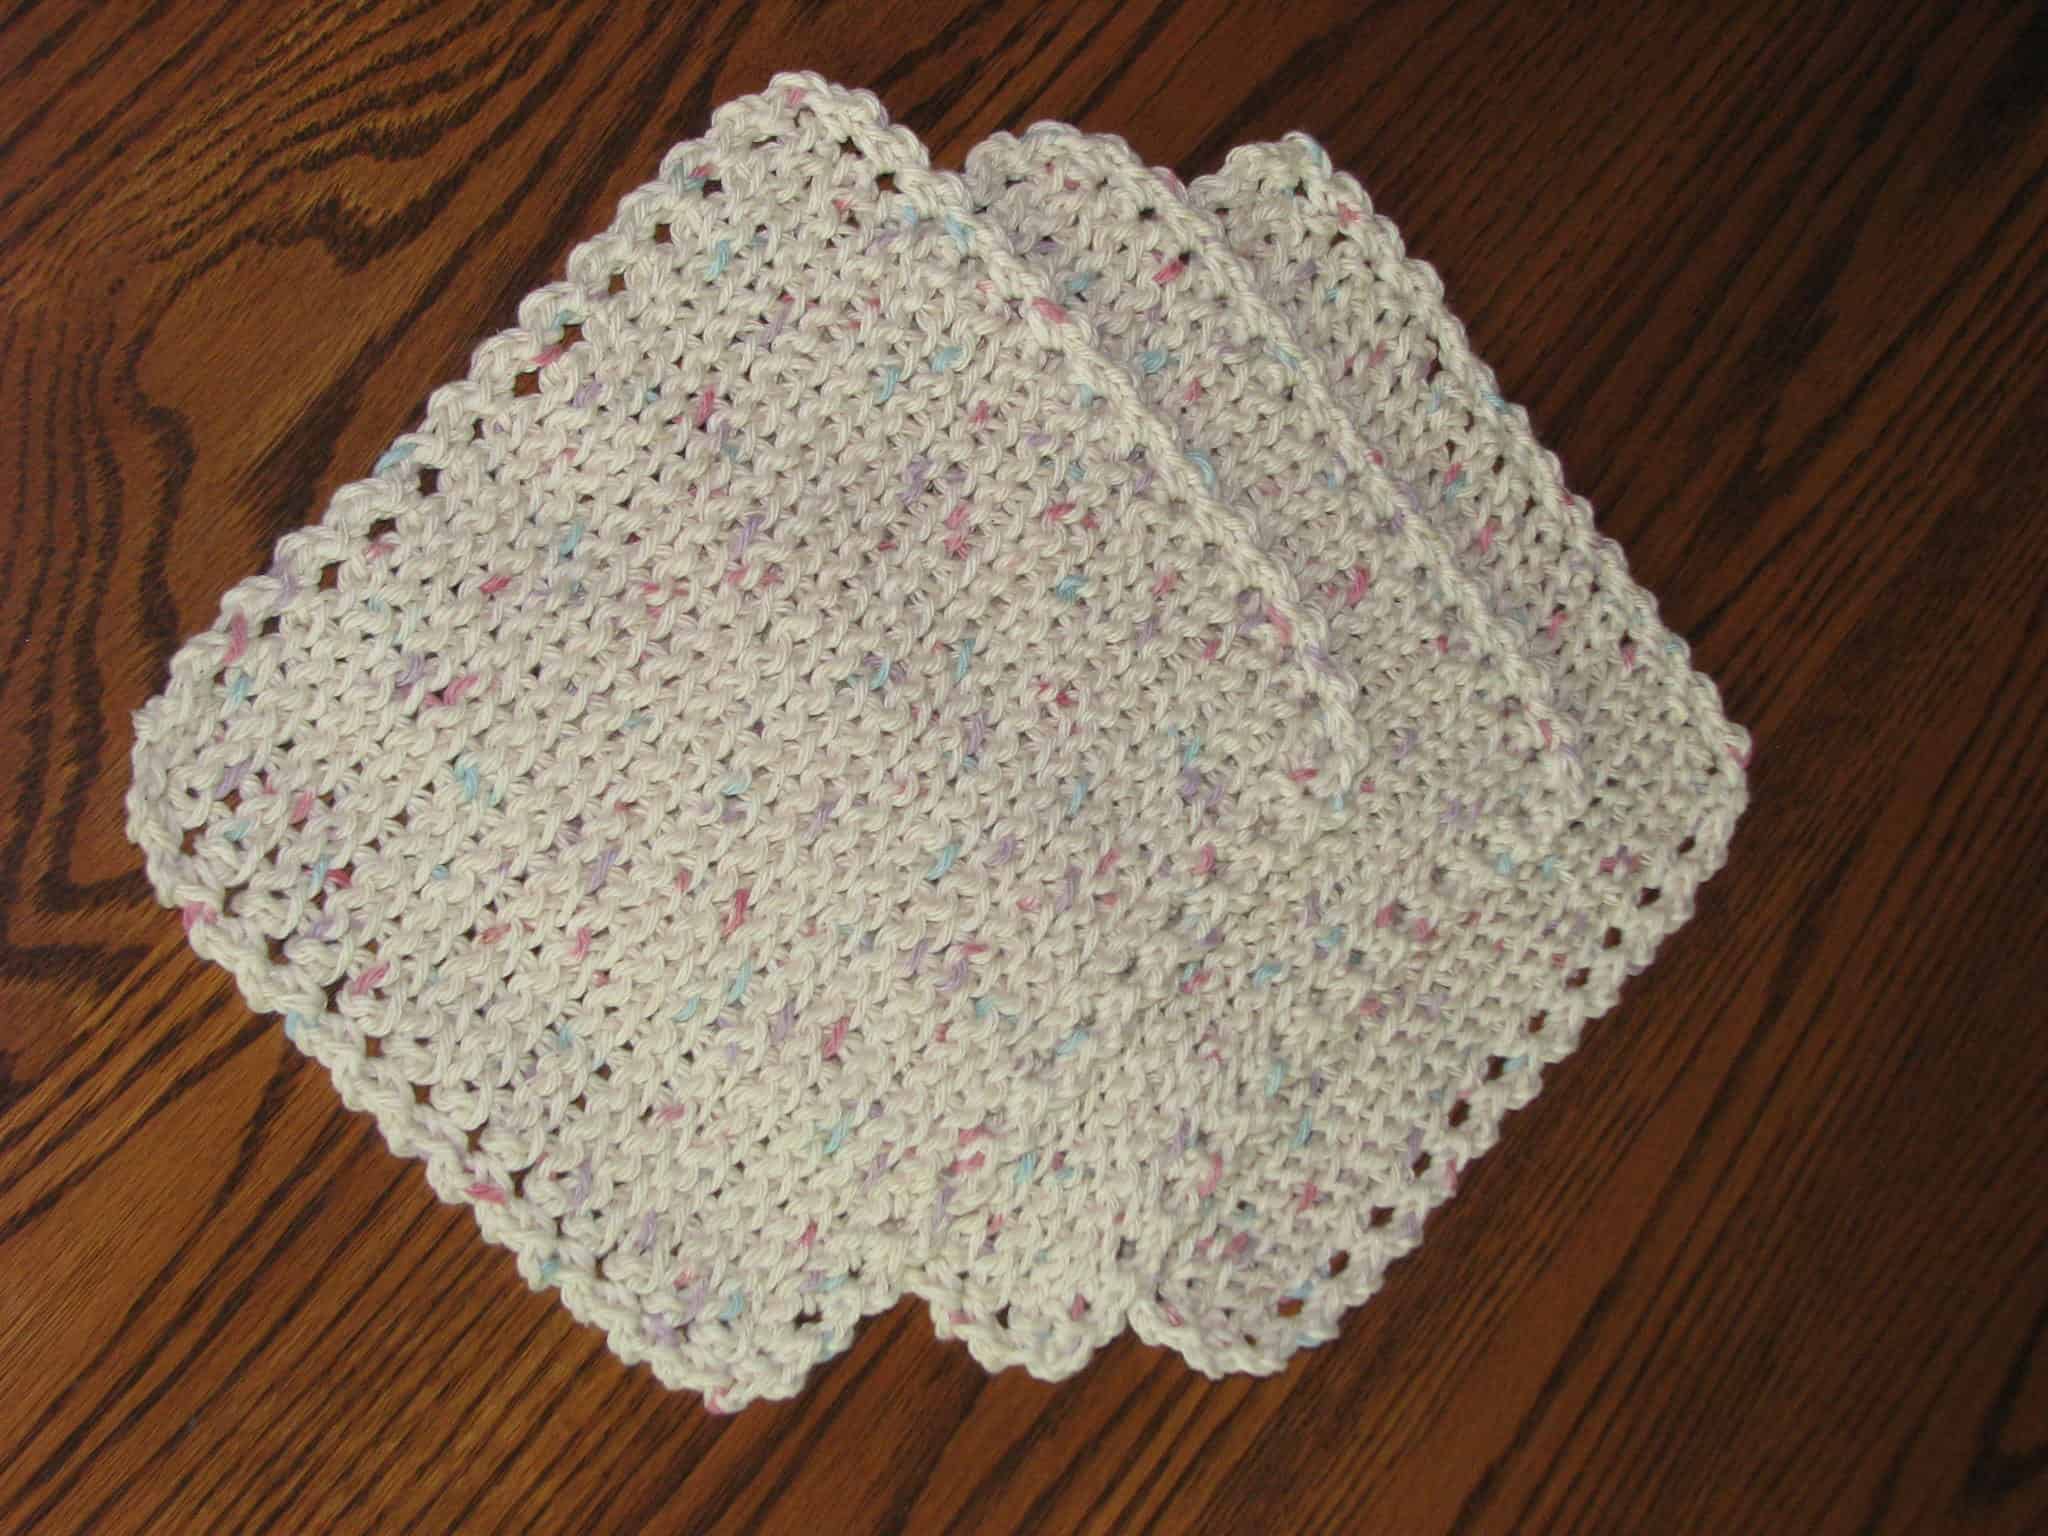 New Crocheted Dishcloths added to my Shop!